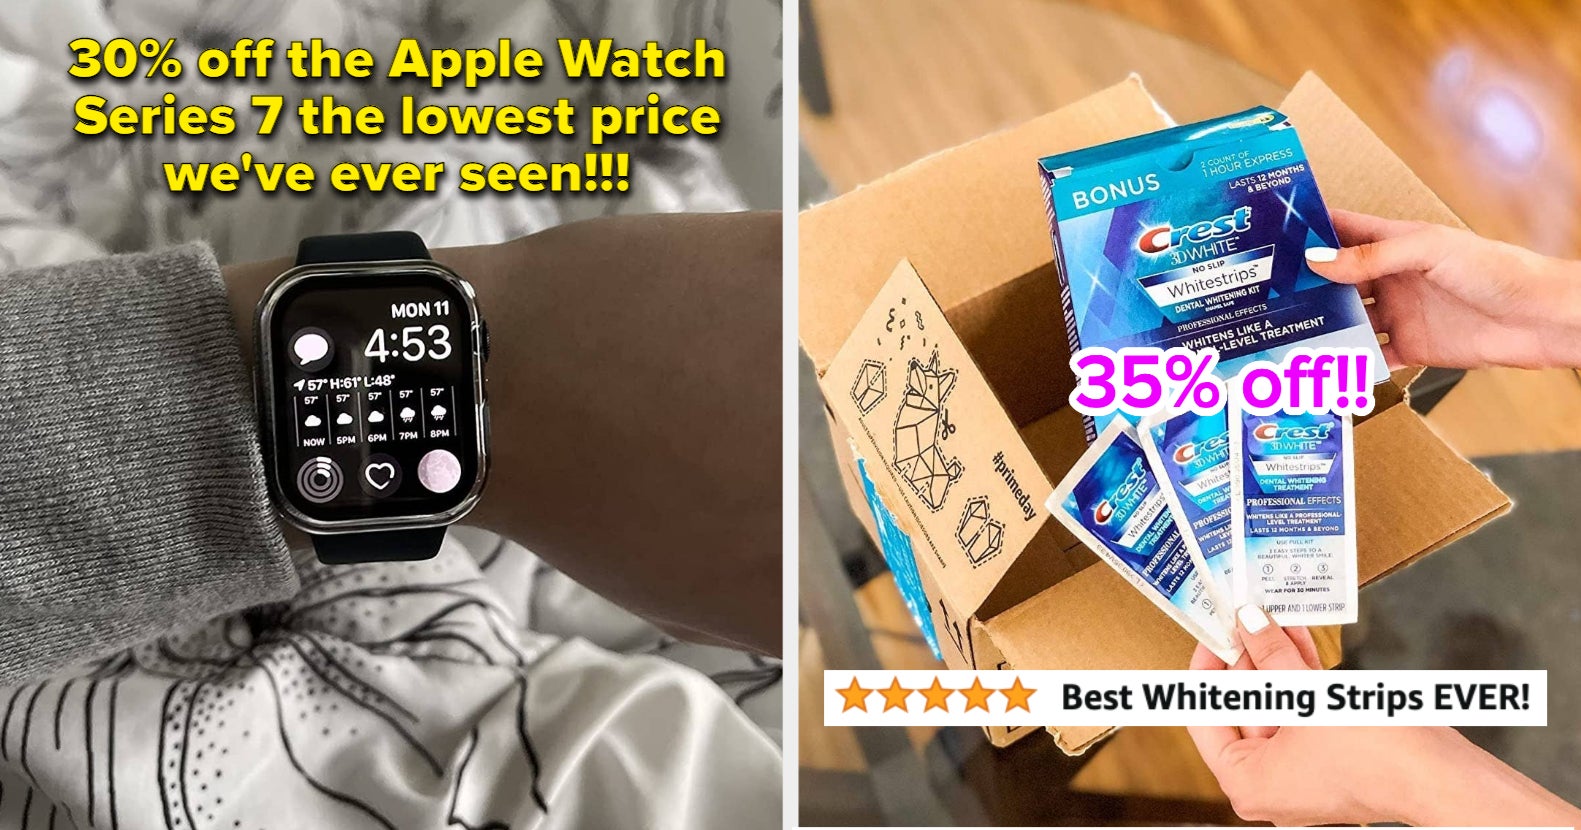 Supplement your Apple Watch Series 9 with these Renpho HealthKit smart  scales from $18